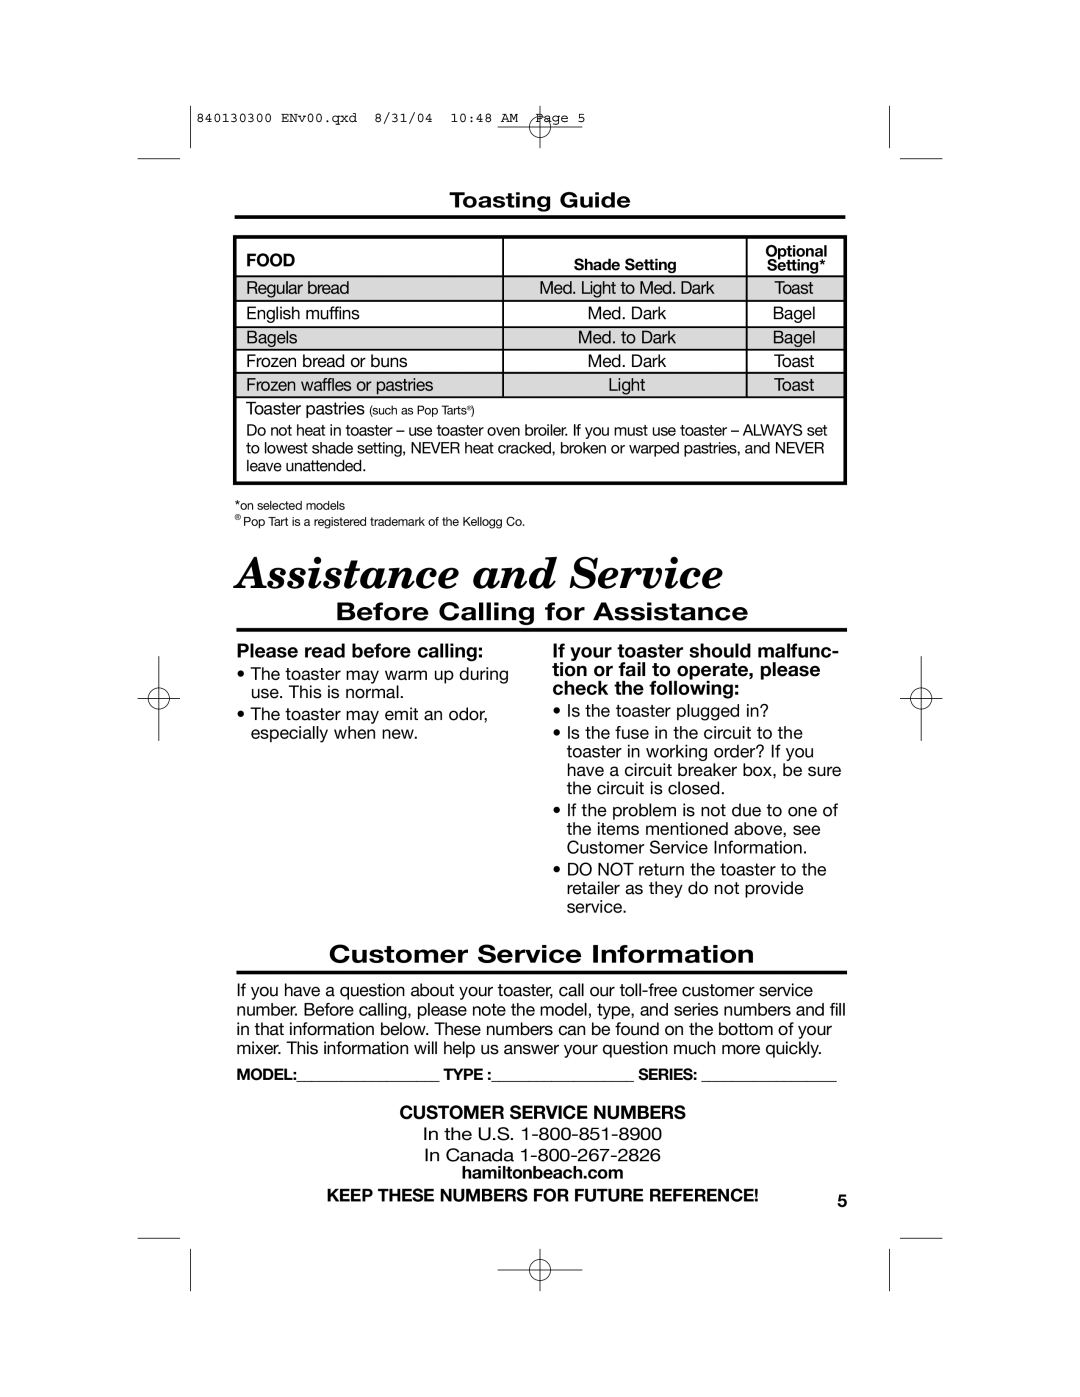 Hamilton Beach All-Metal Toasters Assistance and Service, Before Calling for Assistance, Customer Service Information 